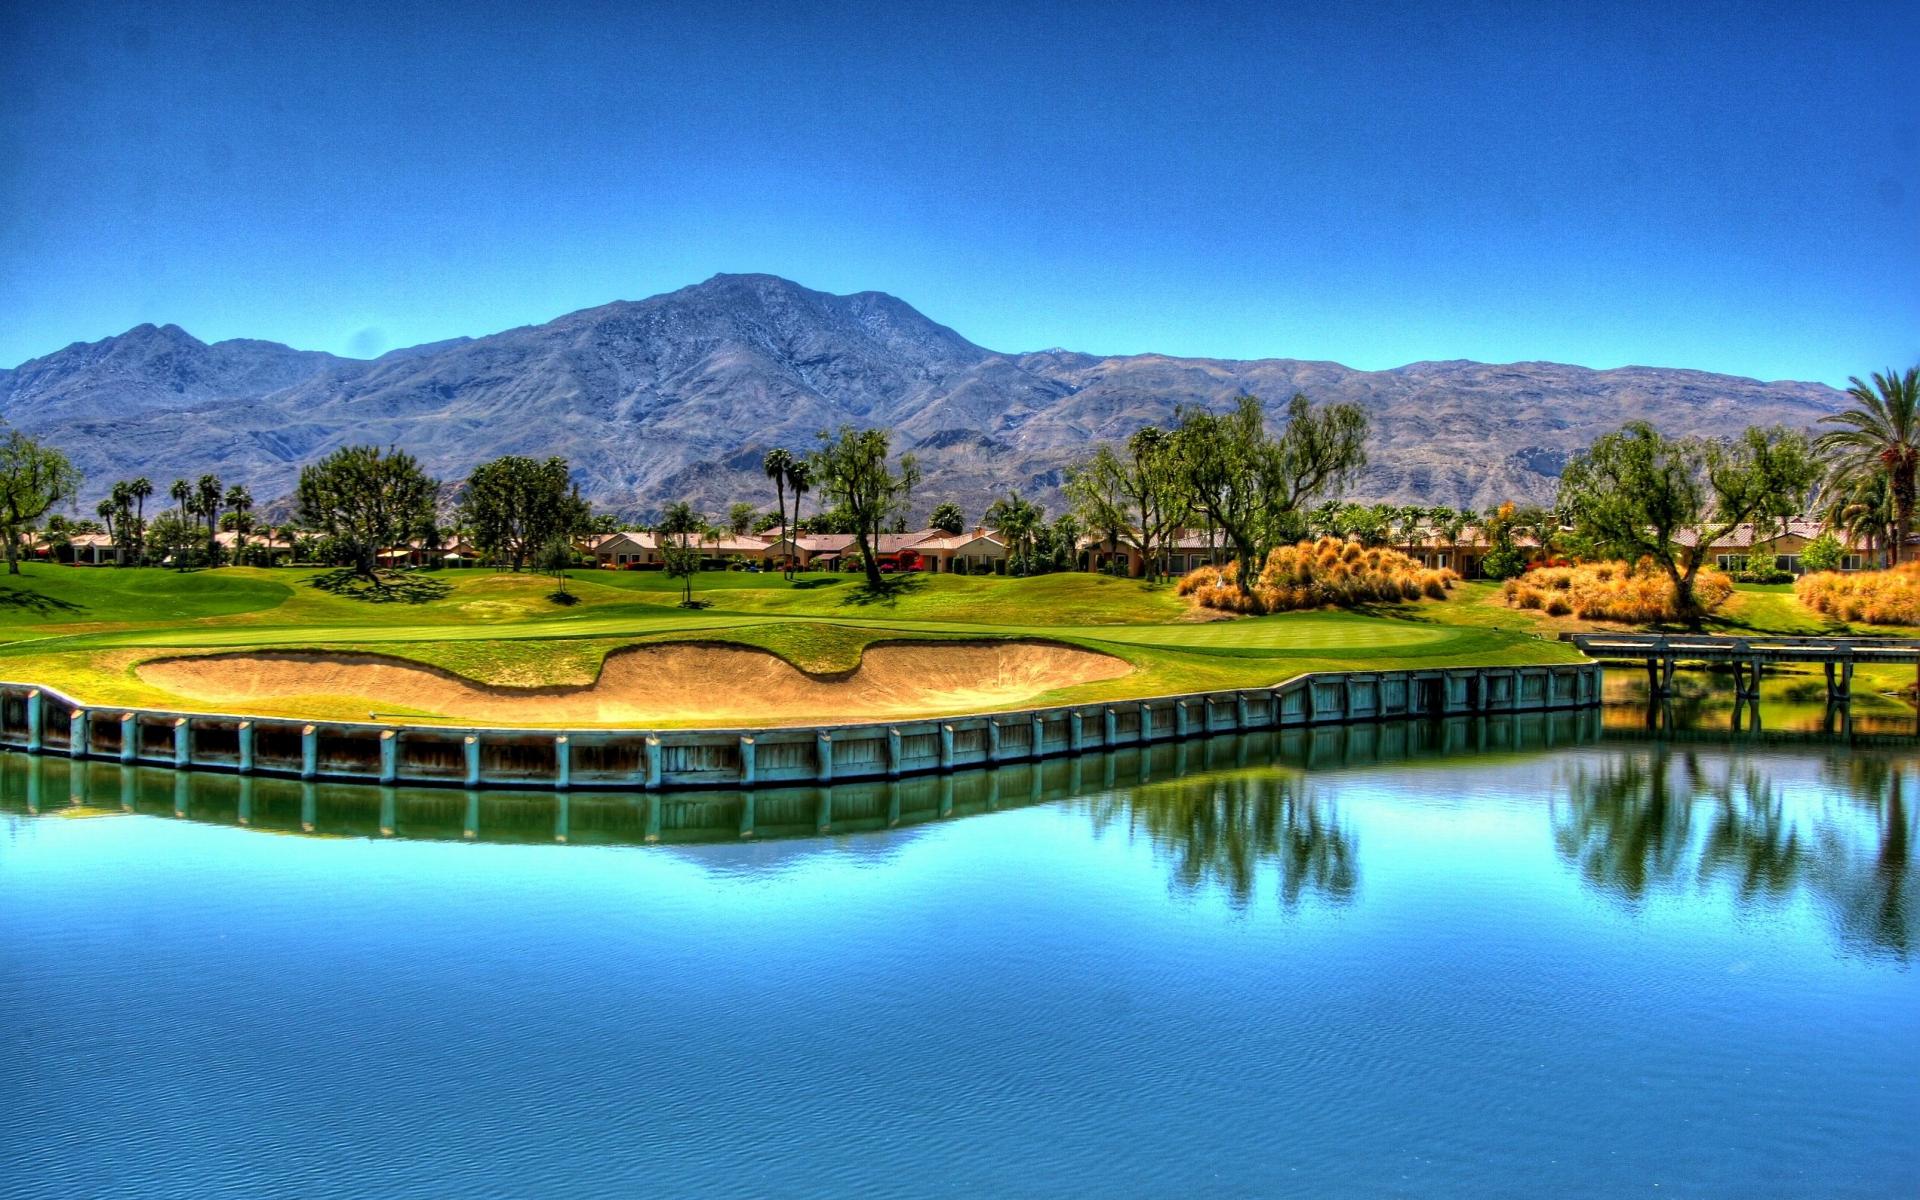 Golf Course HD Wallpaper | Golf Course Pictures | Cool Wallpapers